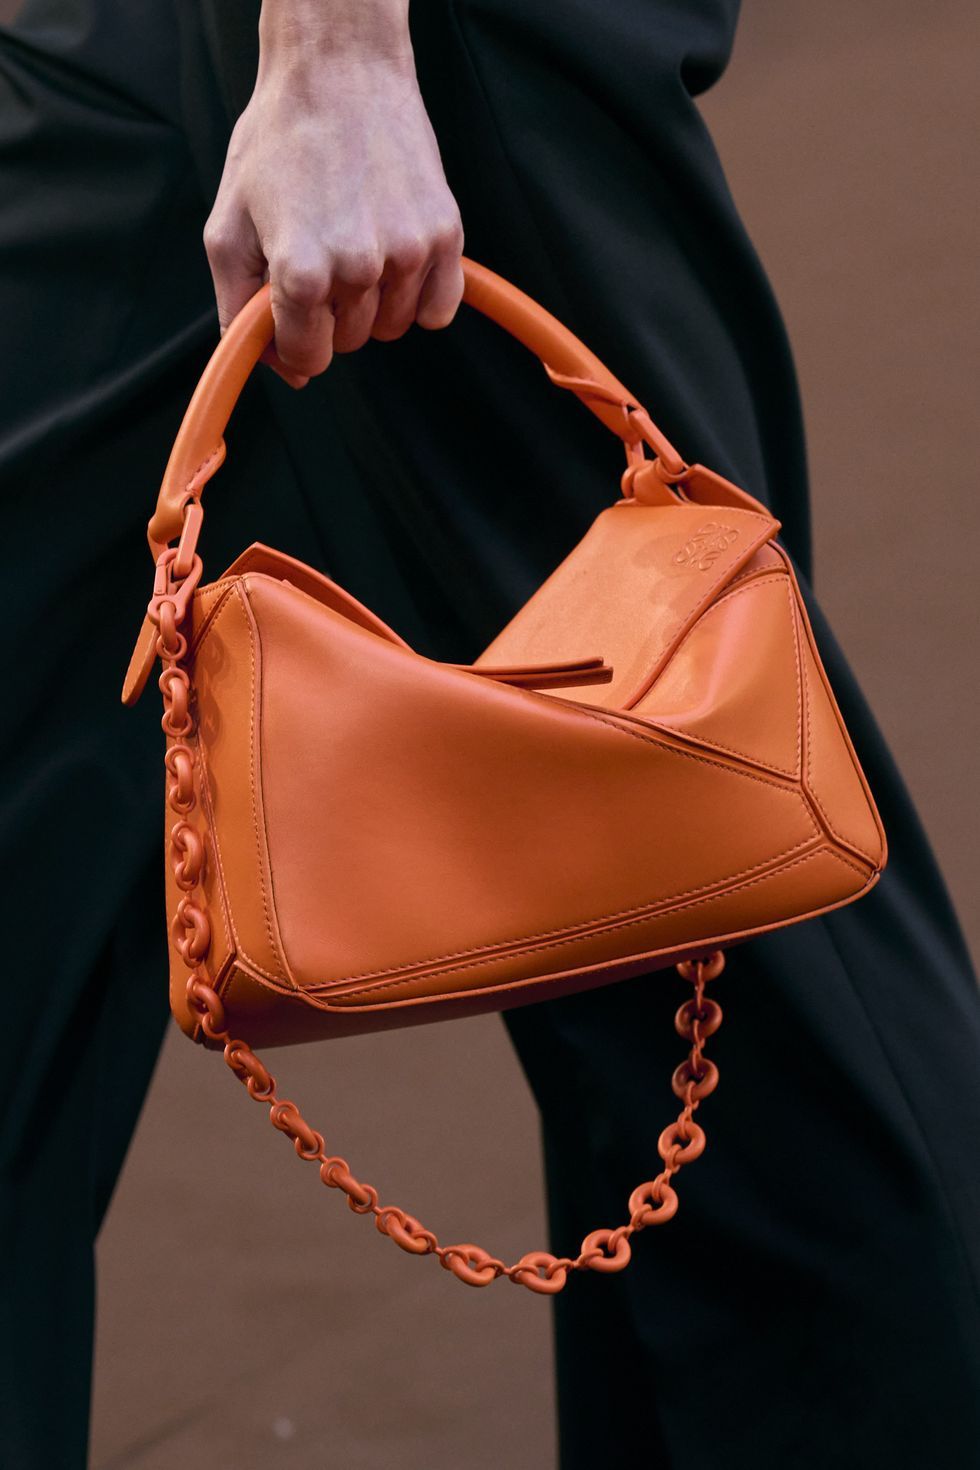 The most beautiful bags from the Louis Vuitton Fall/Winter 2022